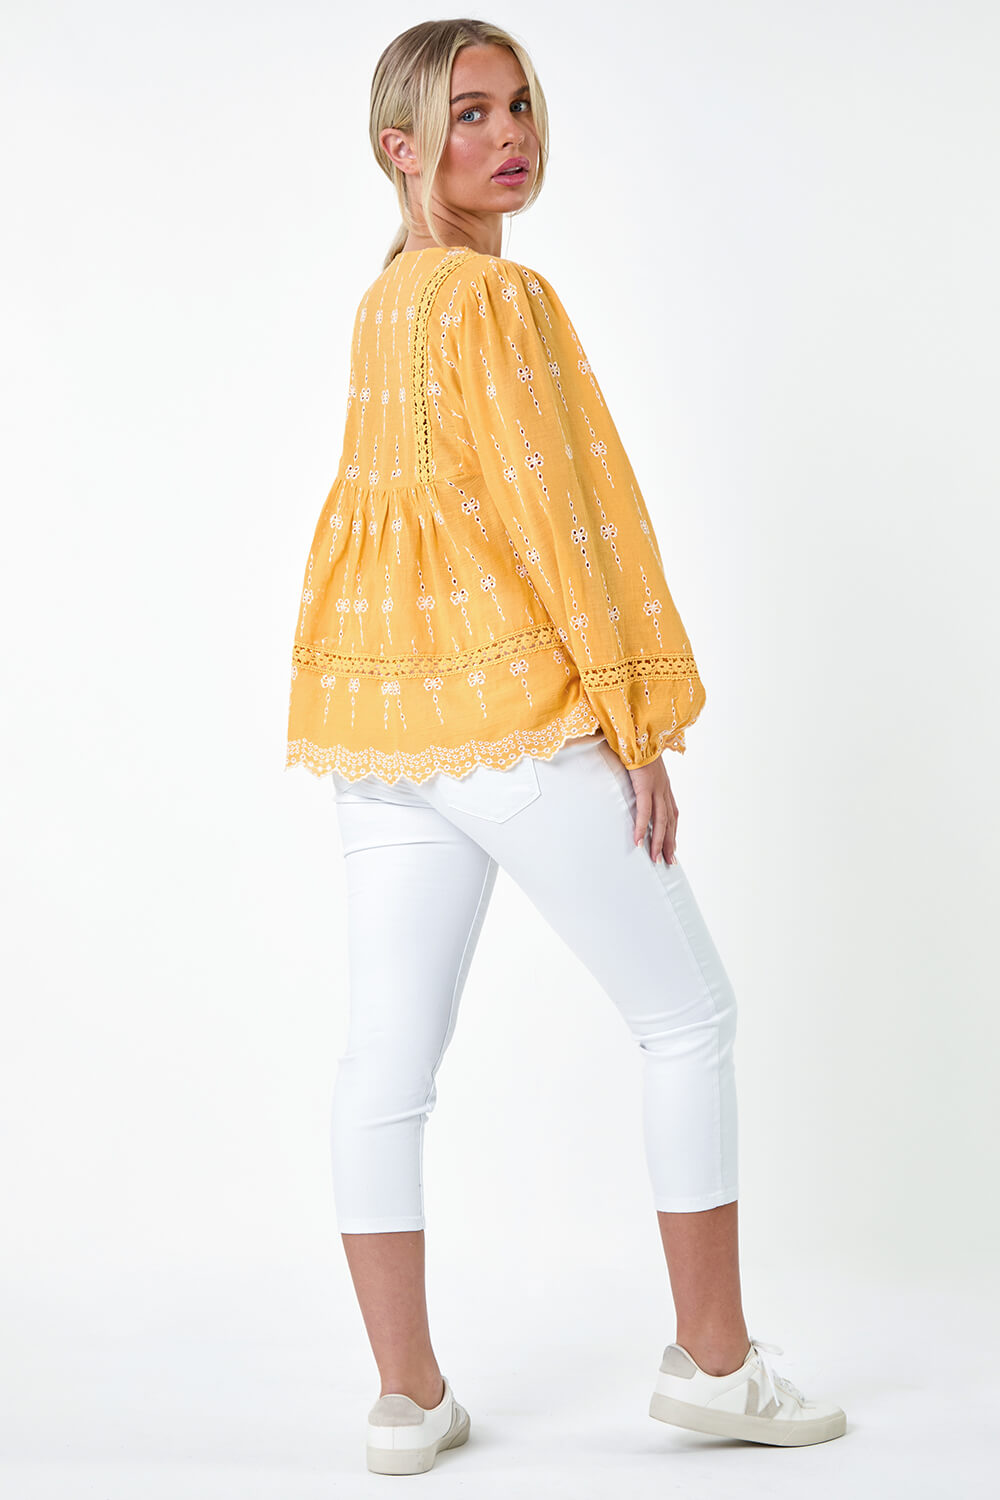 MANGO Petite Embroidered Cotton Smock Top, Image 3 of 5